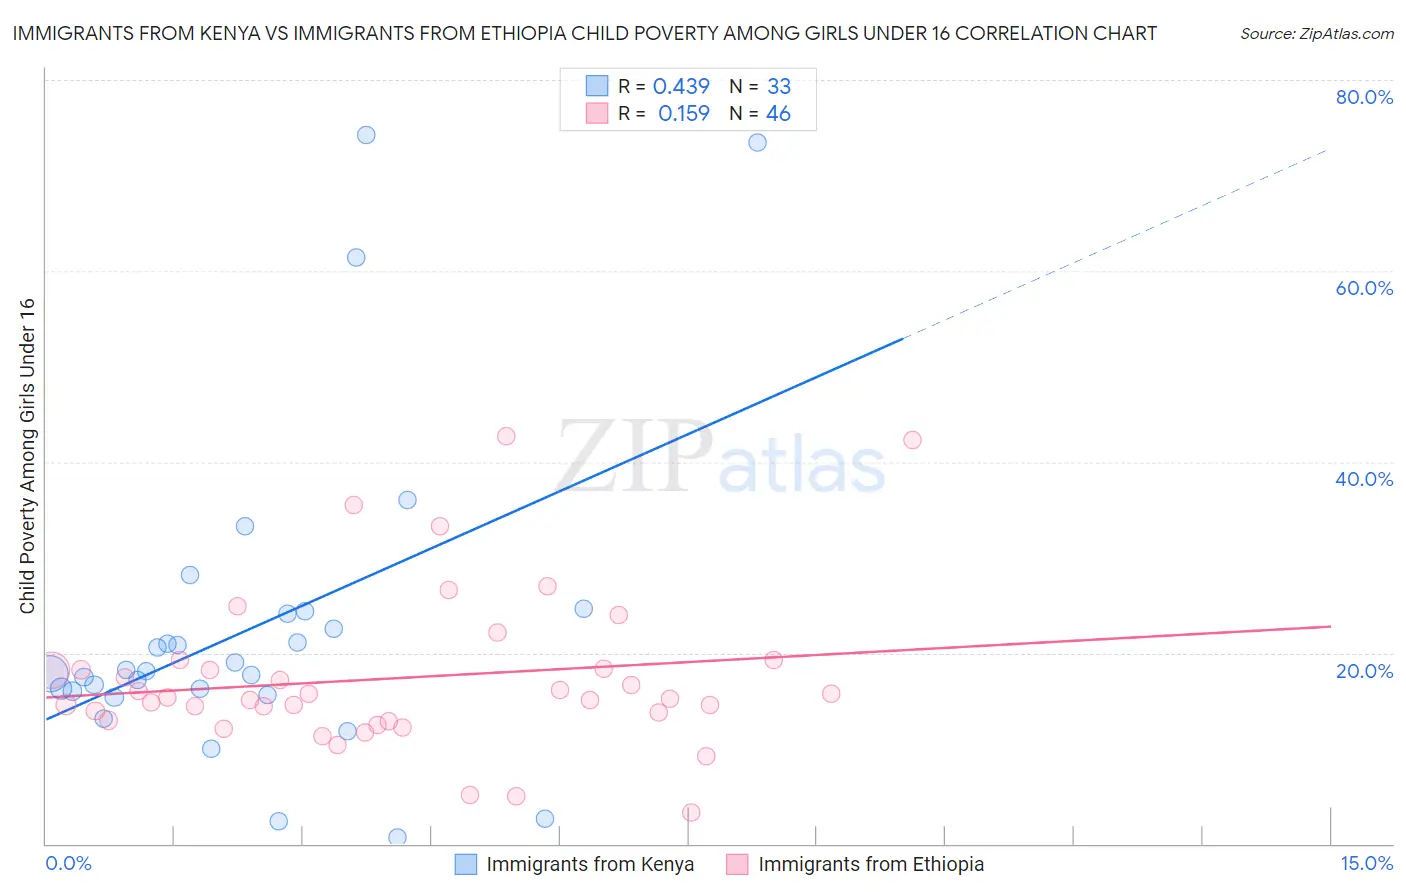 Immigrants from Kenya vs Immigrants from Ethiopia Child Poverty Among Girls Under 16